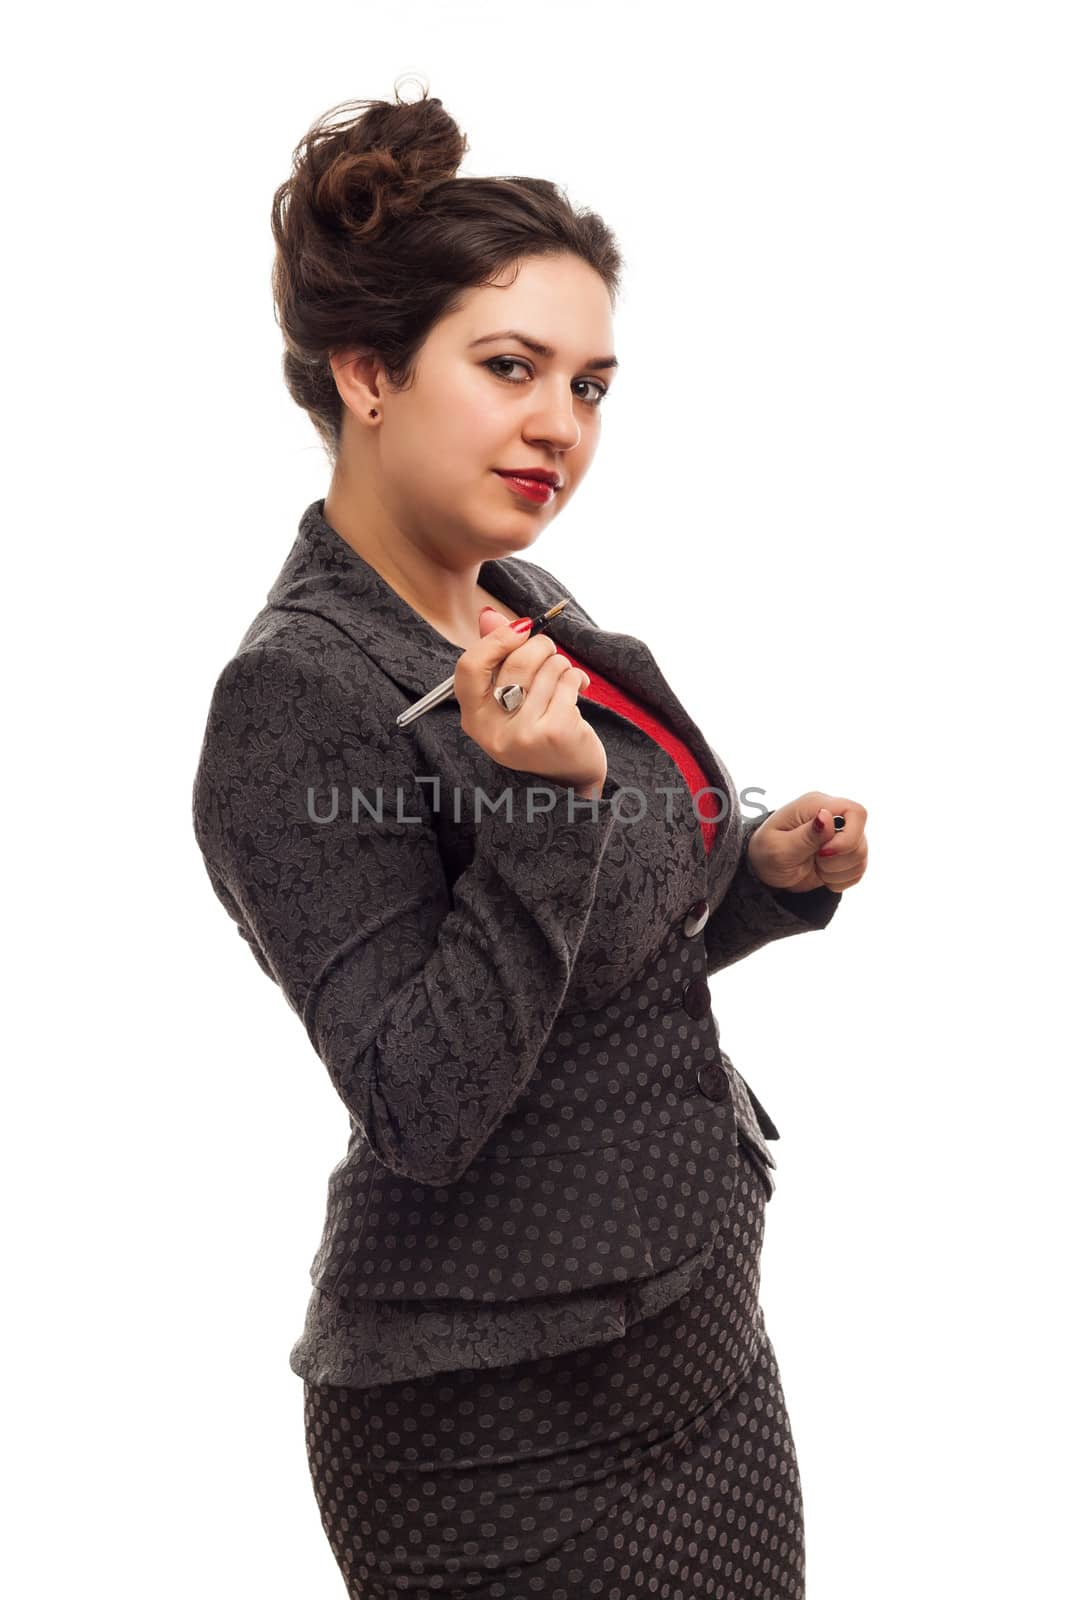 Confident business woman portrait with pen isolated over a white background